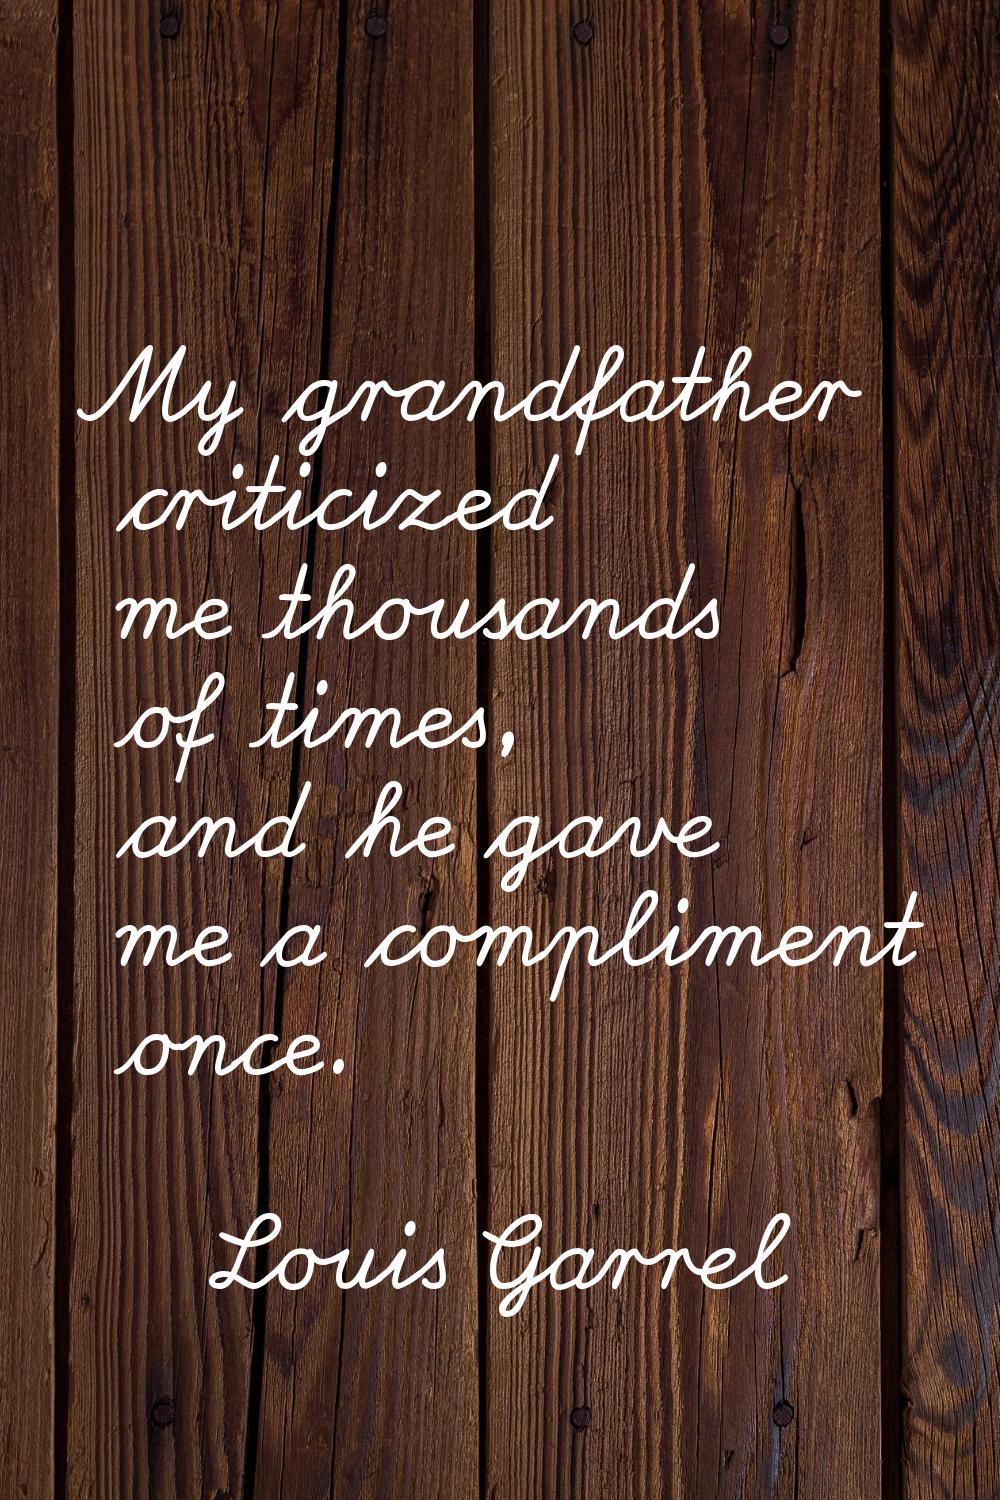 My grandfather criticized me thousands of times, and he gave me a compliment once.